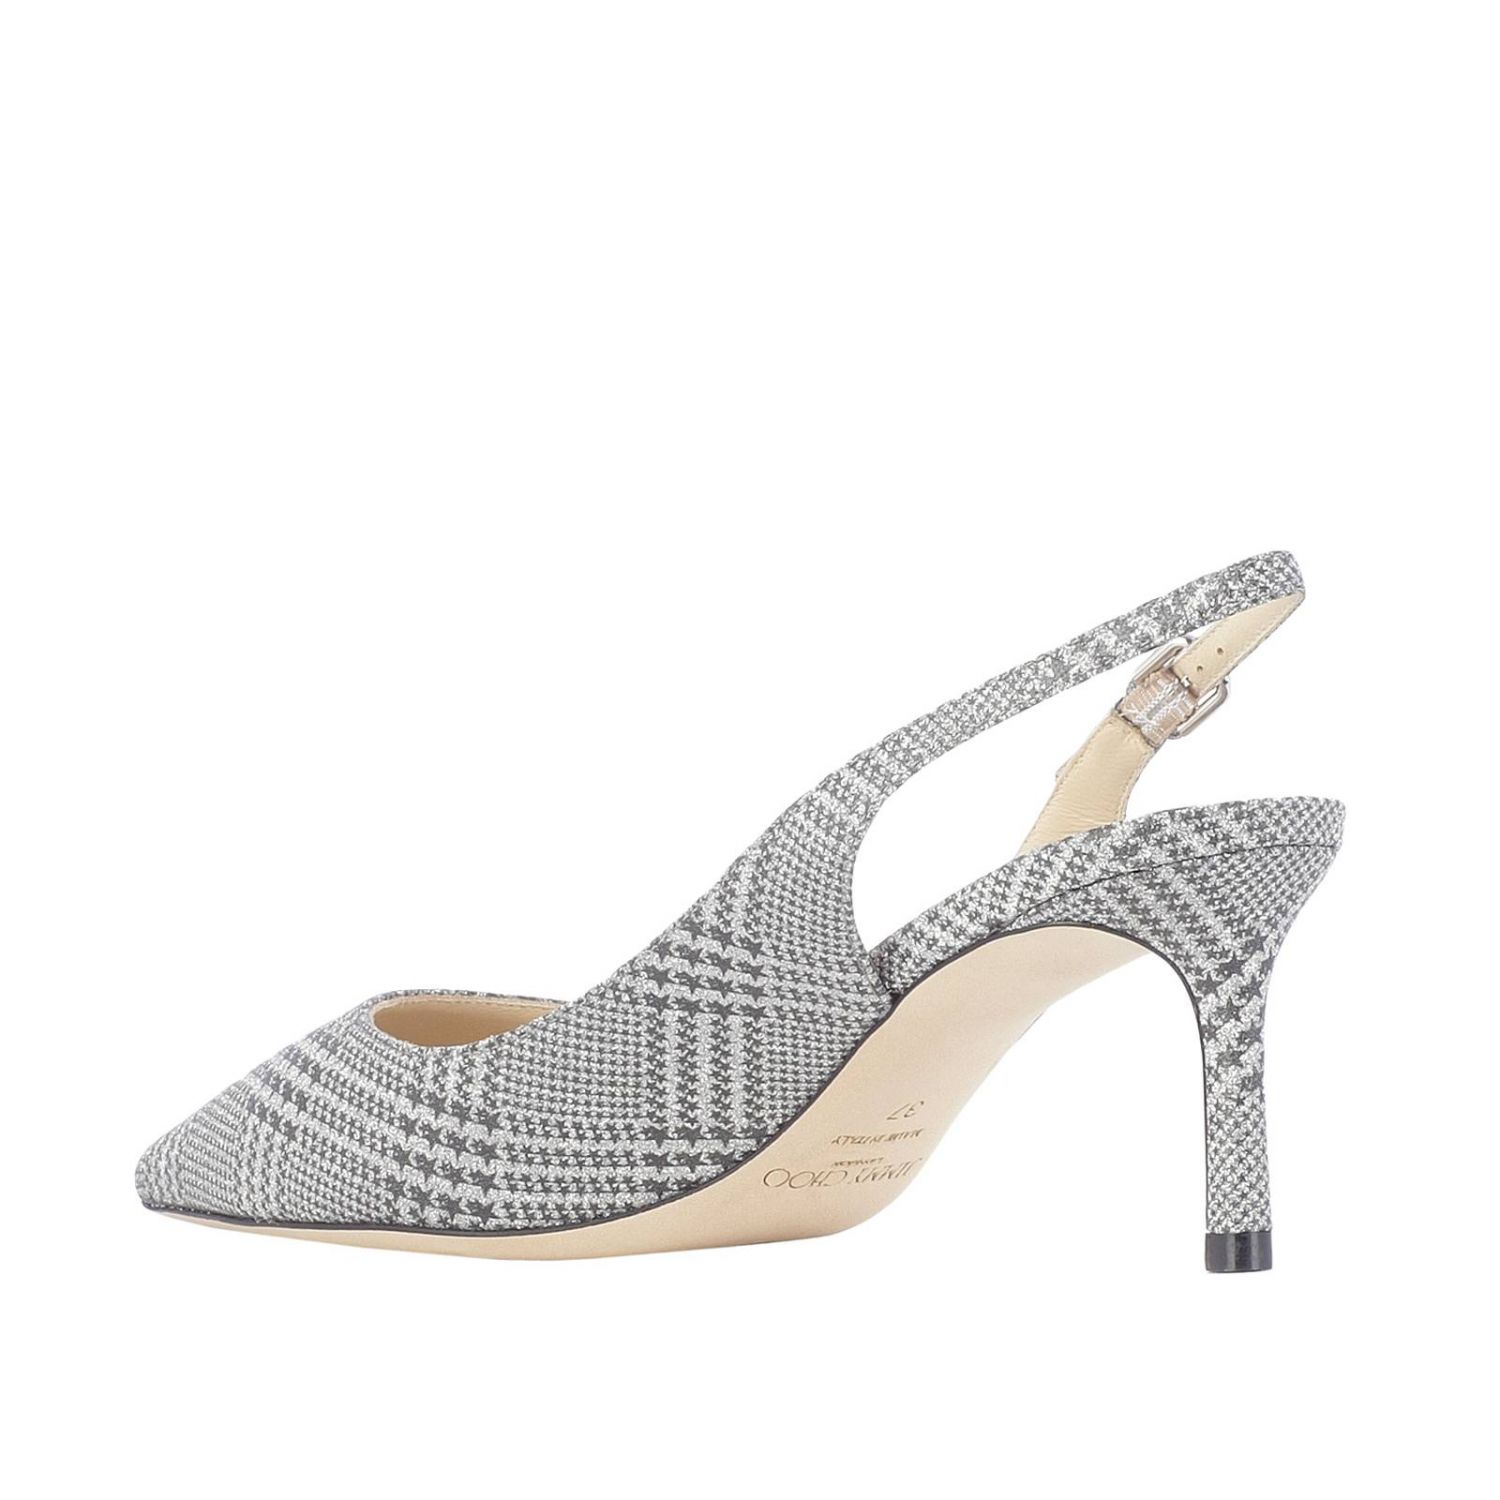 Jimmy Choo Outlet: Erin pointed sandal in houndstooth patterned fabric ...